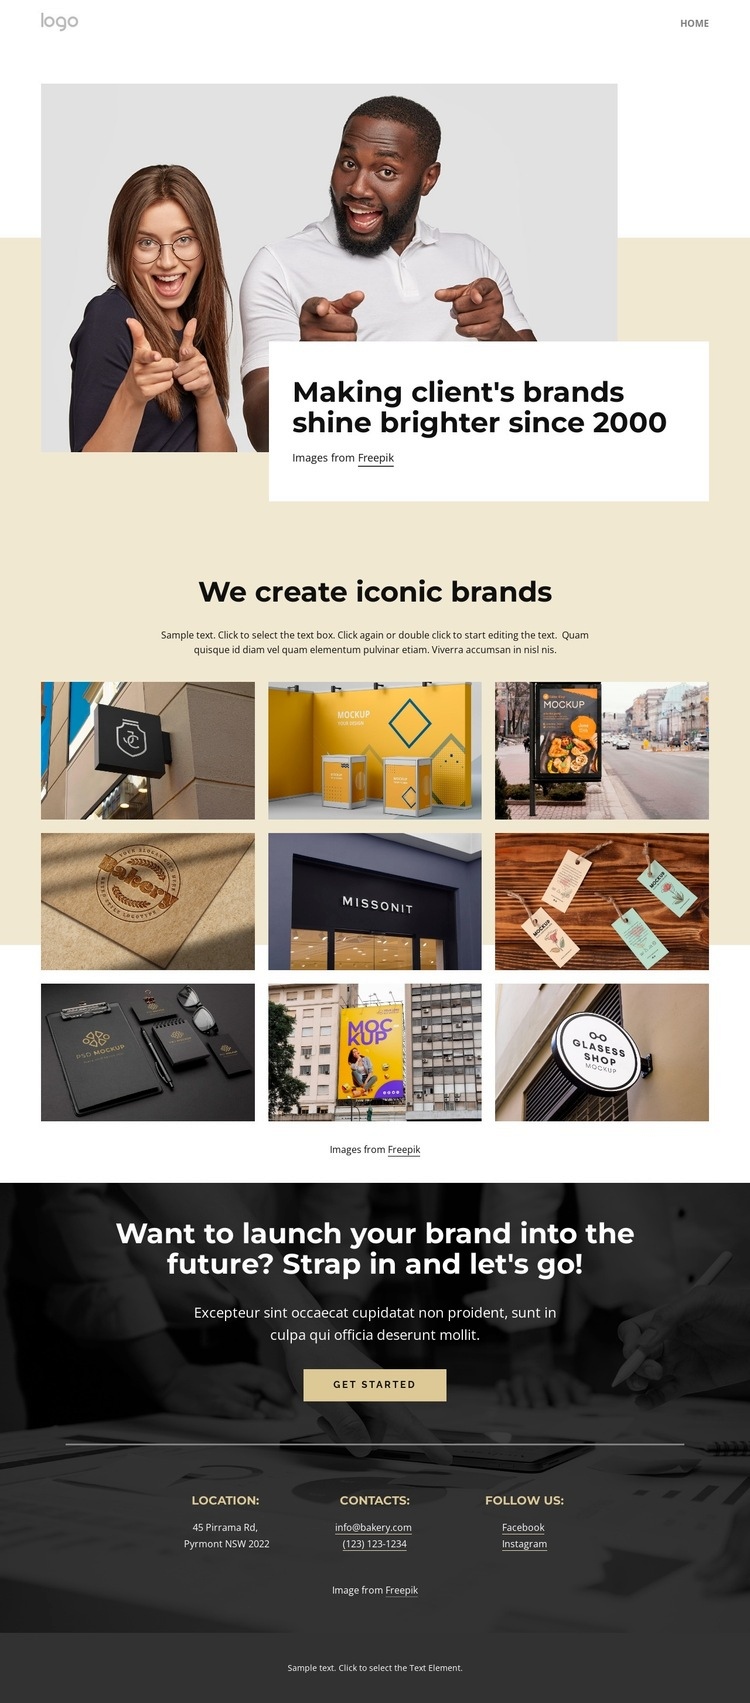 We create iconic brands Web Page Design